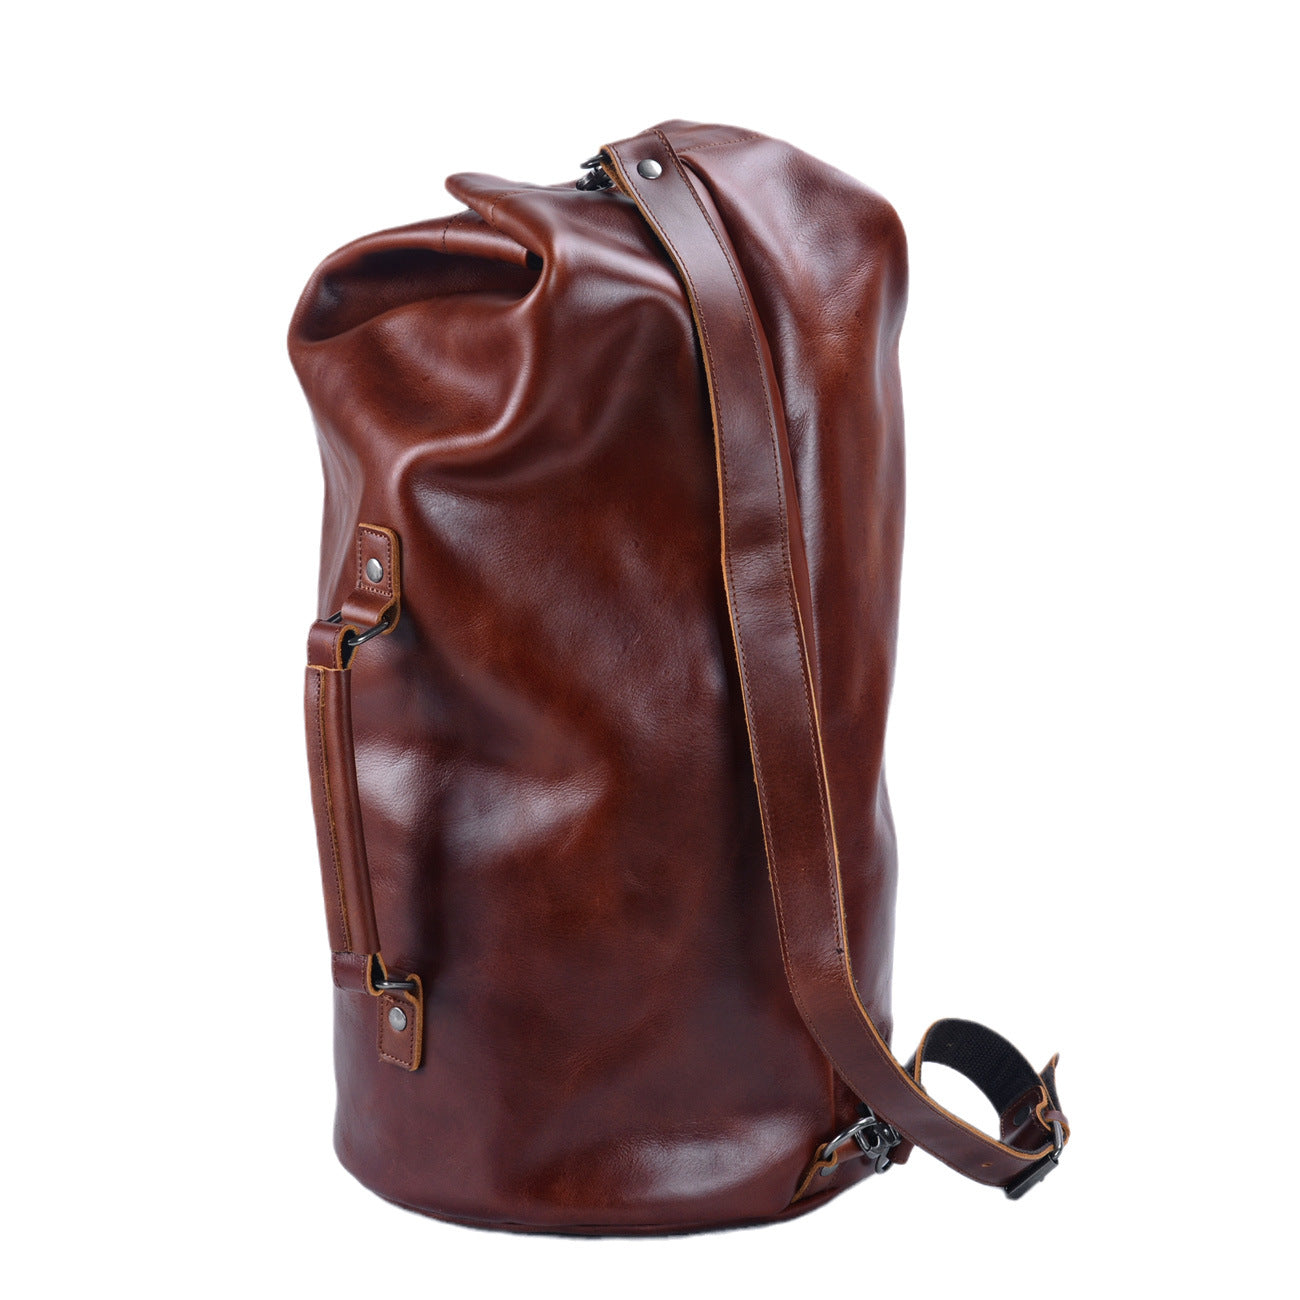 Leather Cross Body Bag for Outdoor Travel